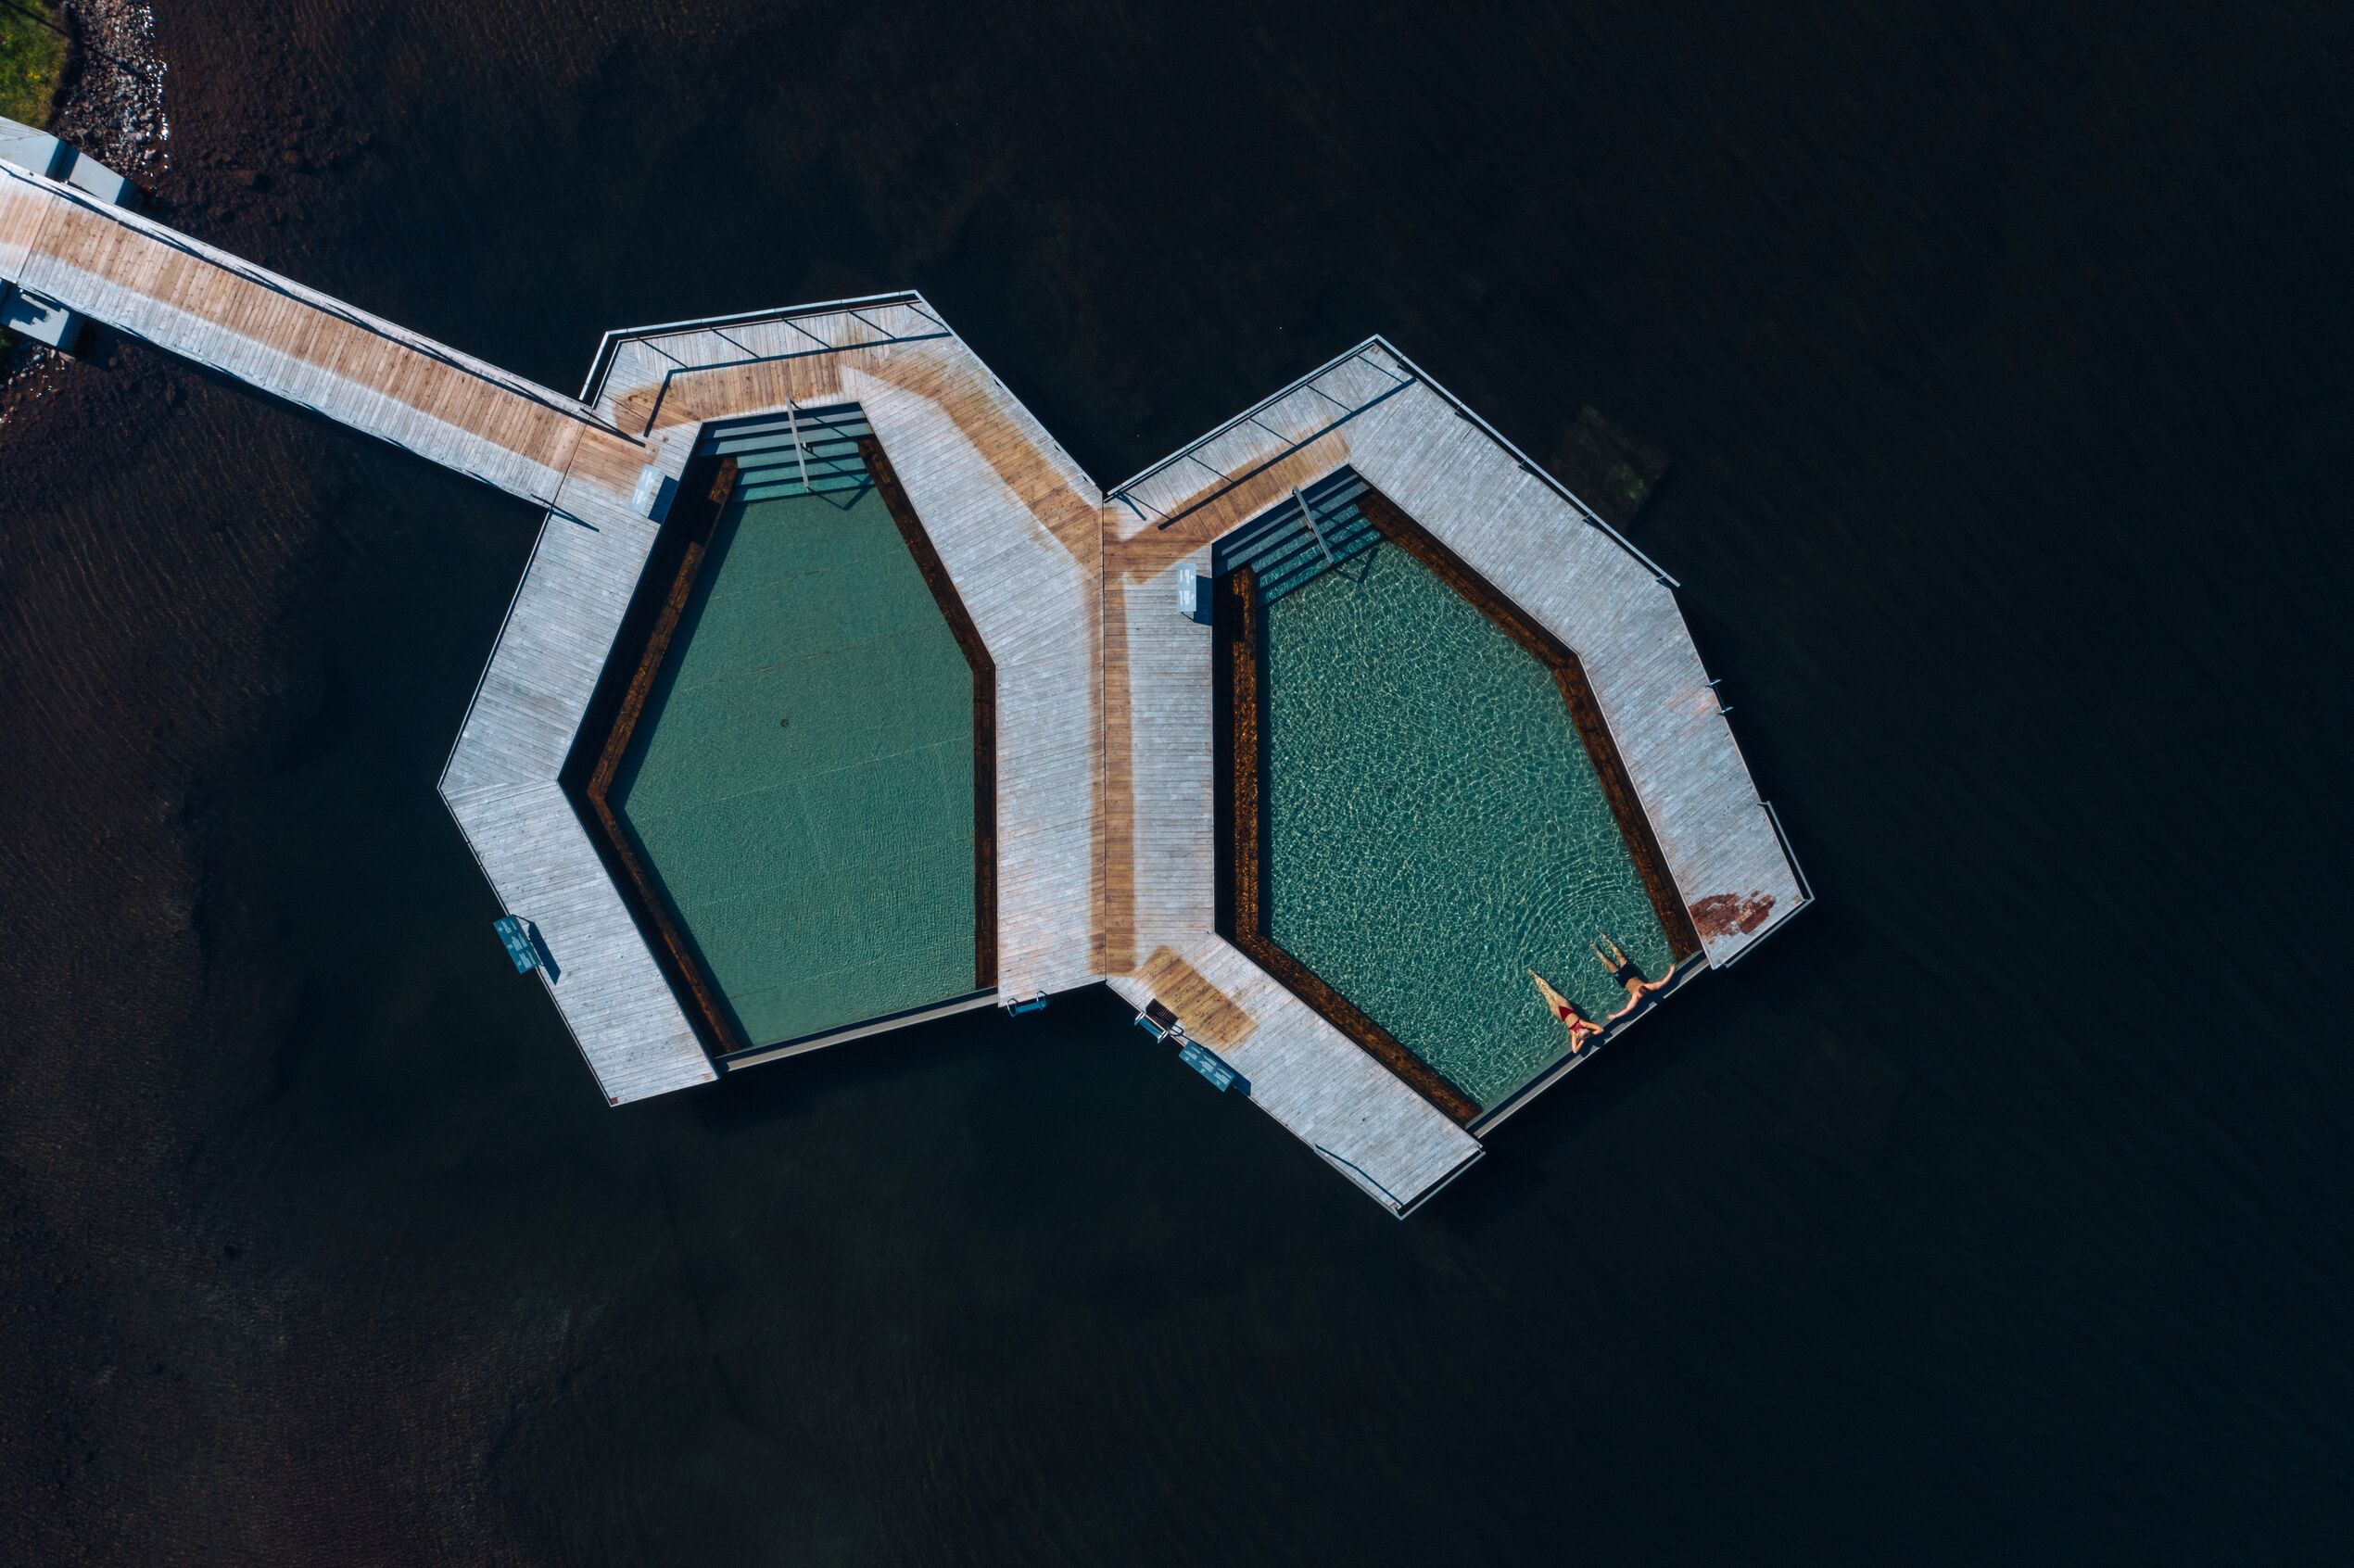 aerial image of a man and a woman bathing in Vök baths, Egilsstaðir. The bath is built into a lake as the hot spring emerges from the bottom of the lake.